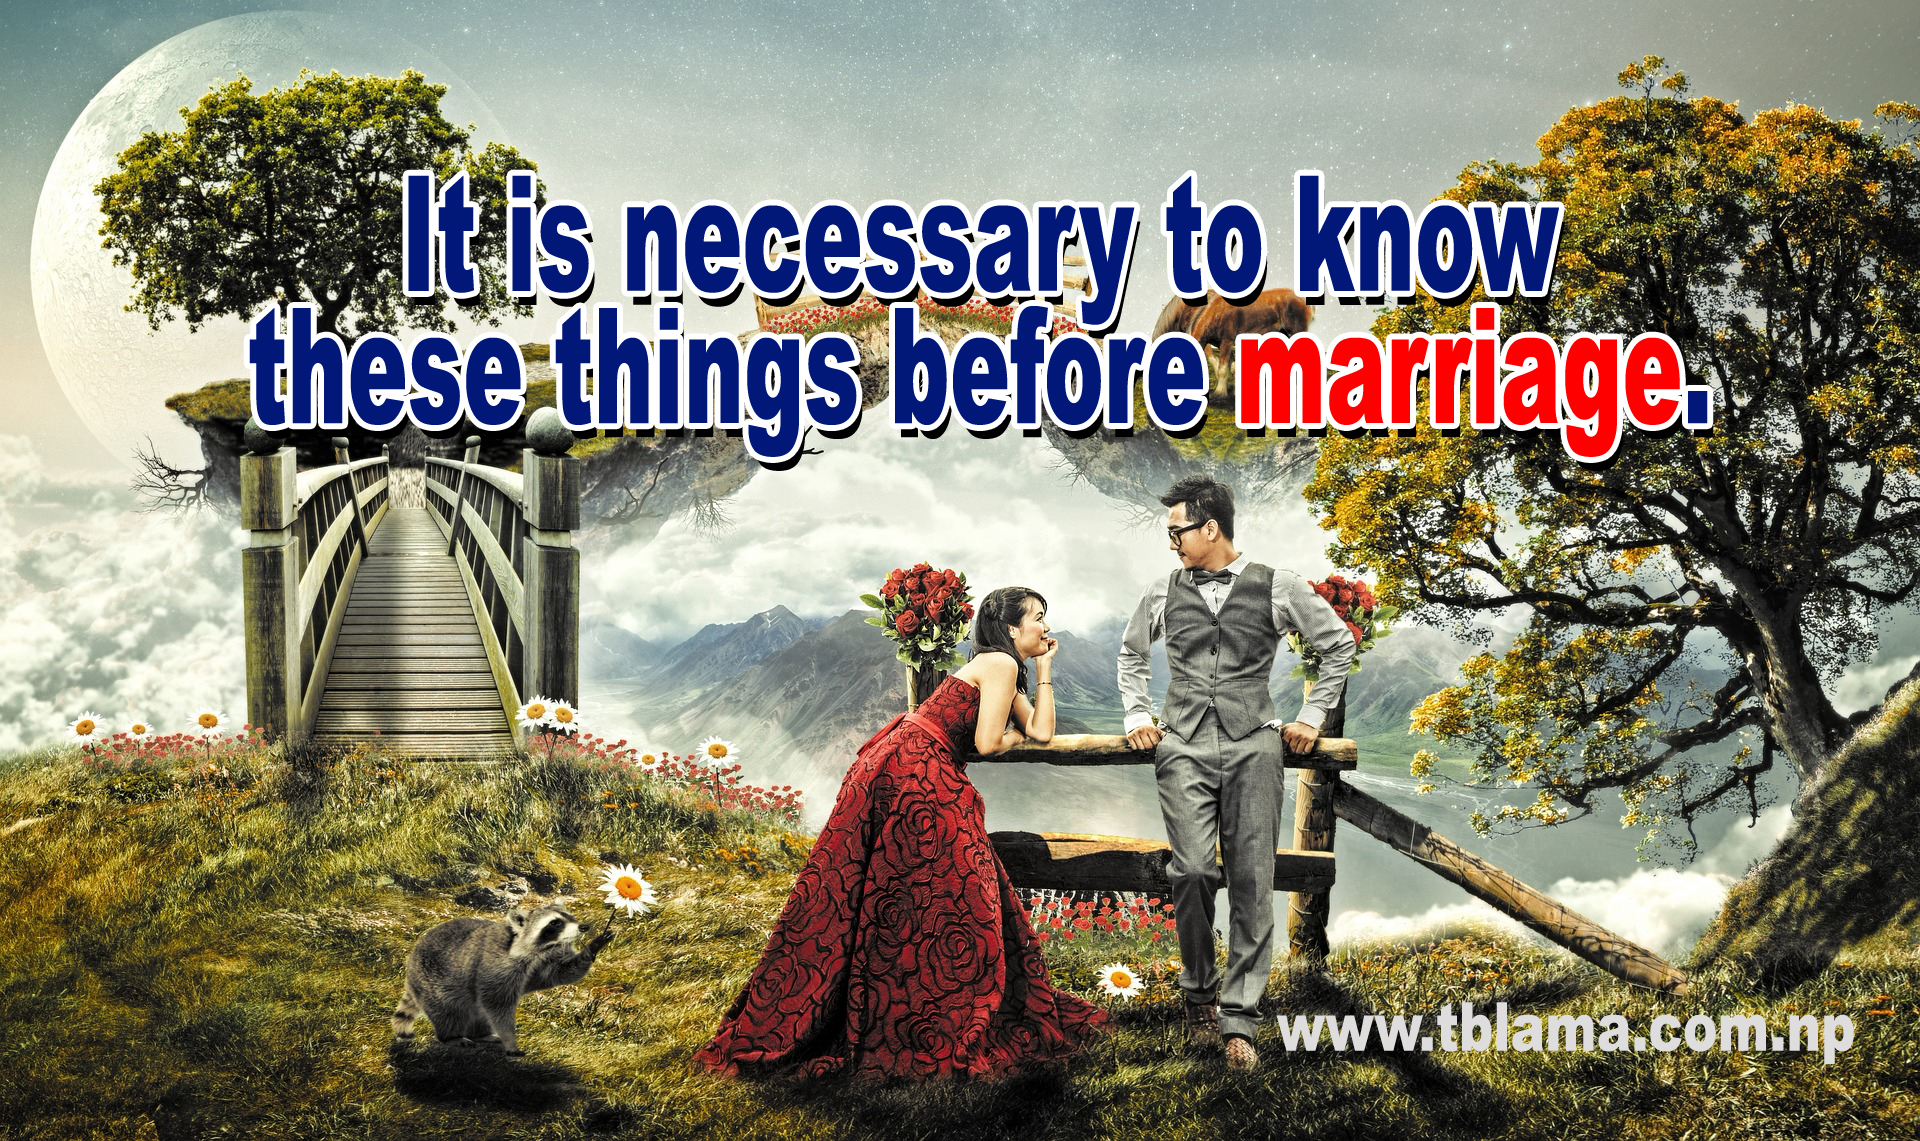 It is necessary to know these things before marriage.